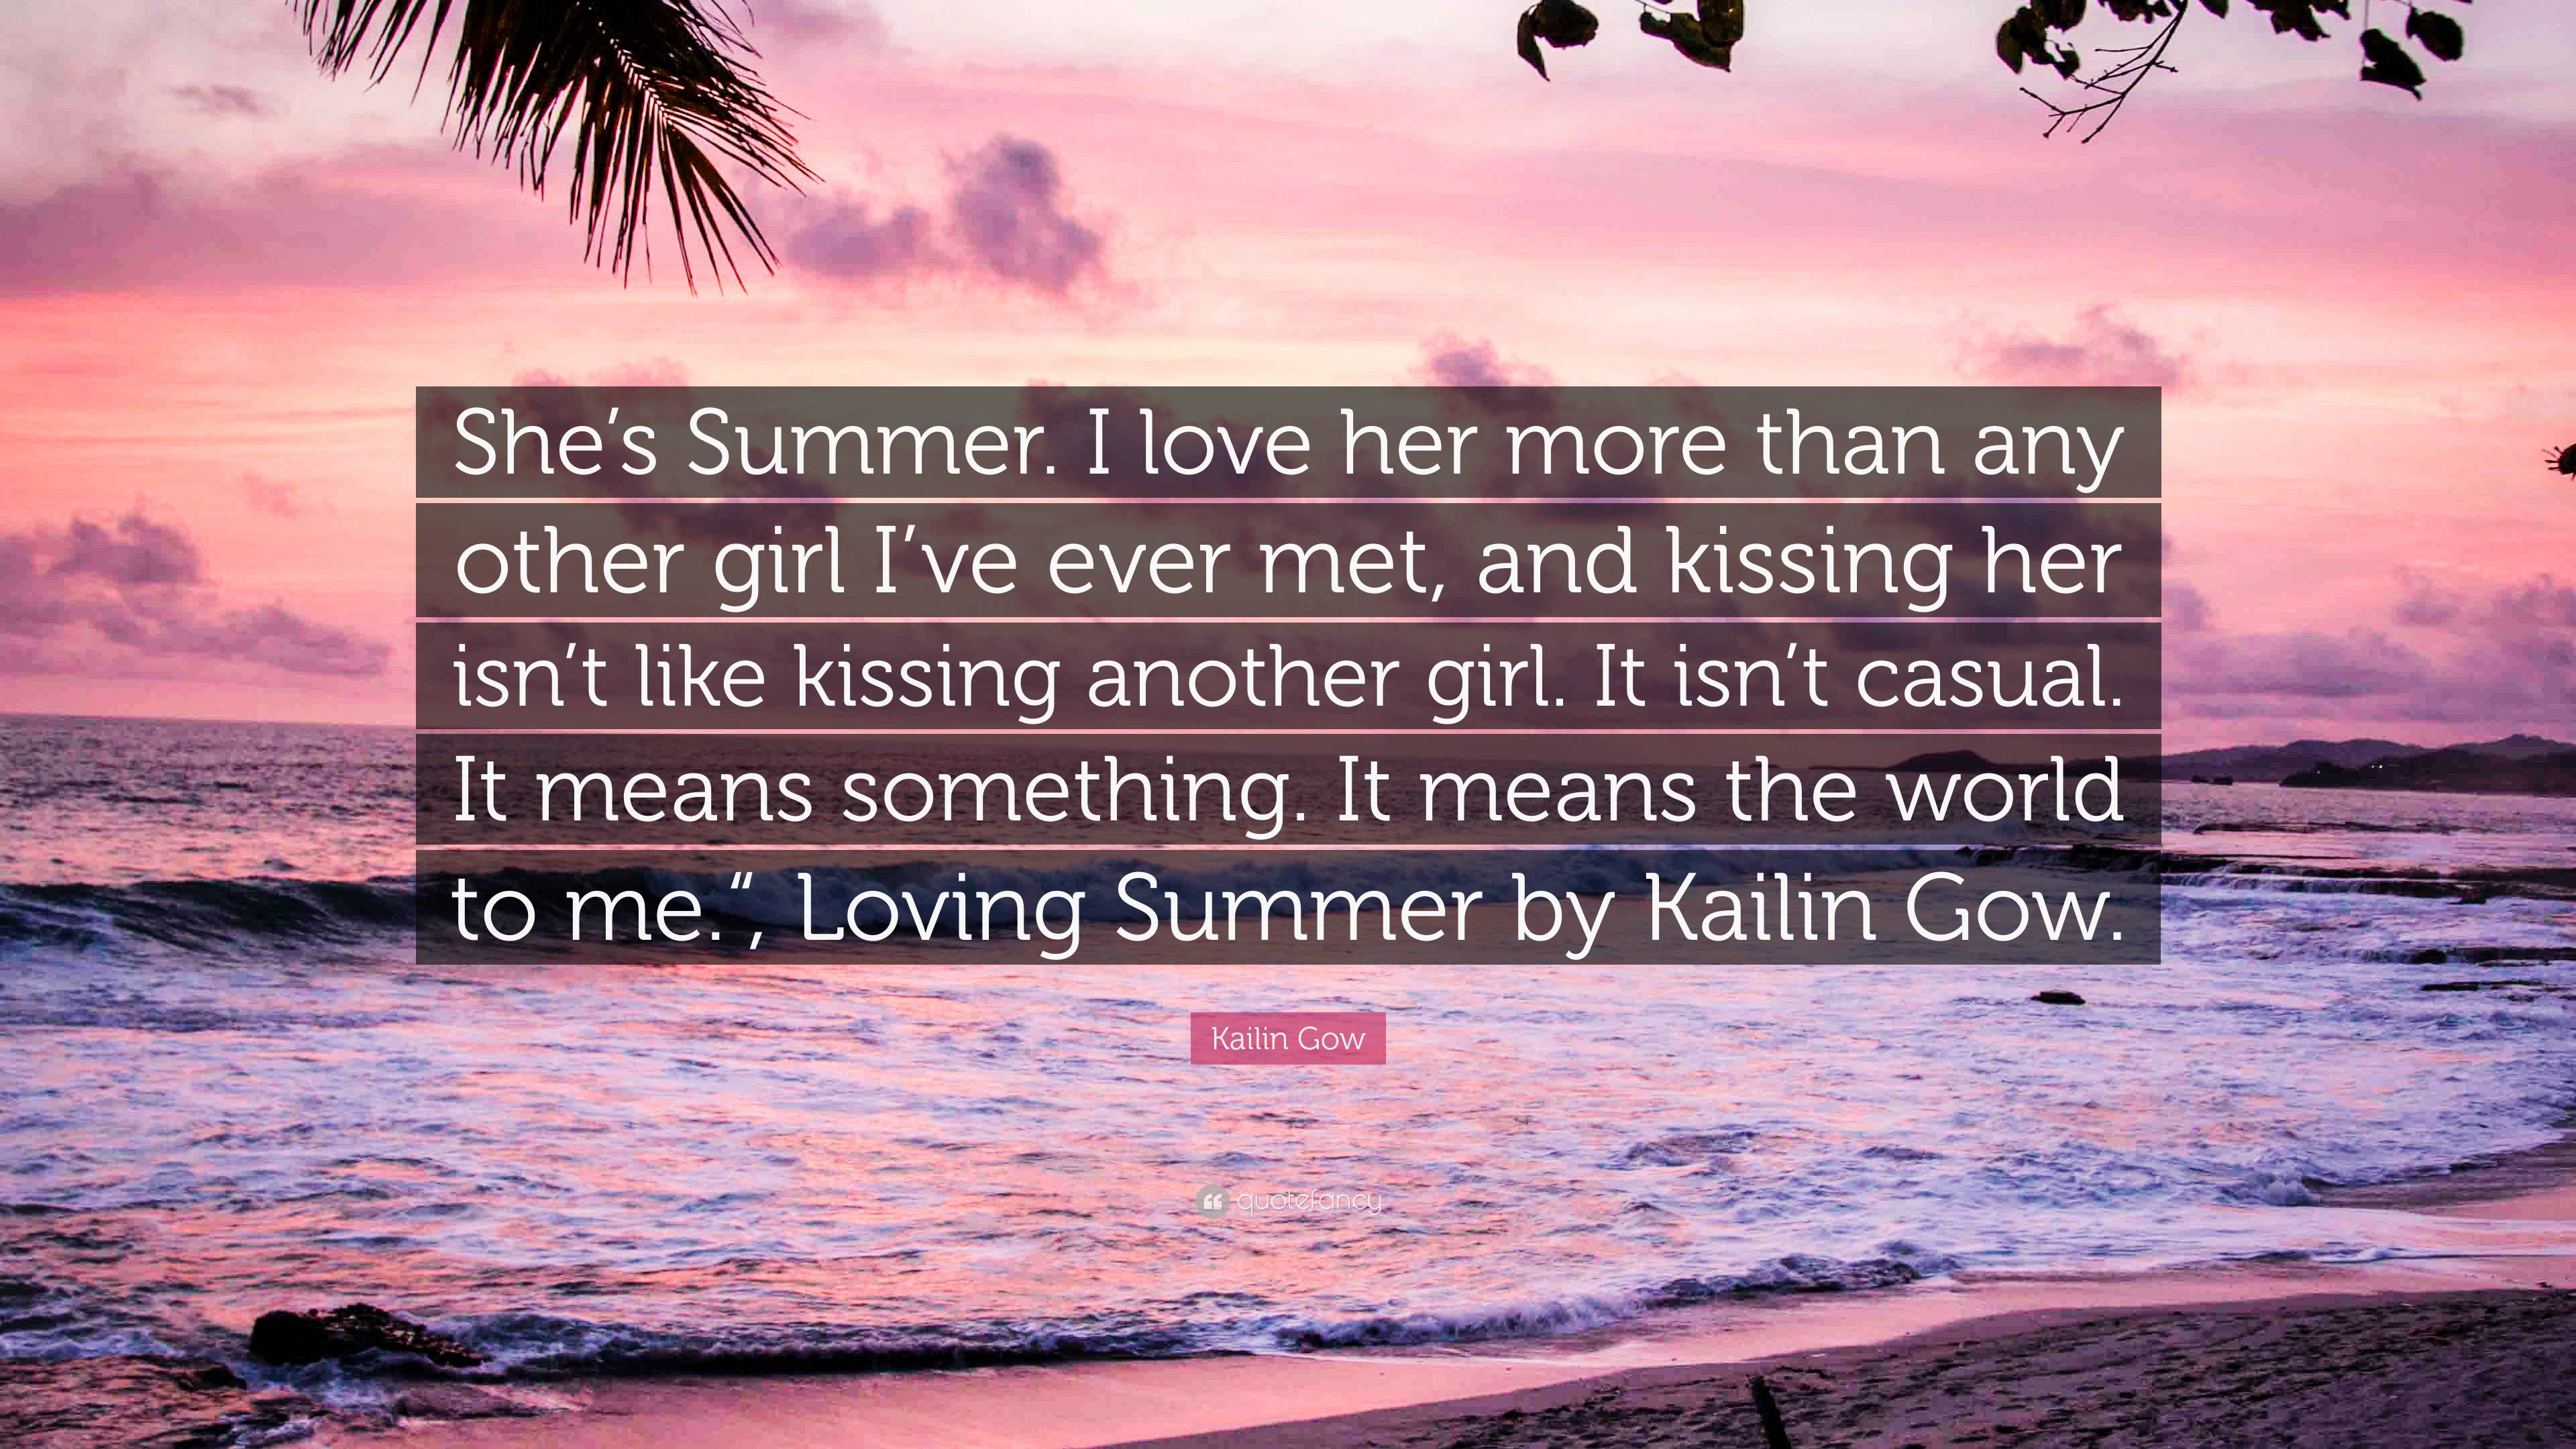 Kailin Gow Quote She S Summer I Love Her More Than Any Other Girl I Ve Ever Met And Kissing Her Isn T Like Kissing Another Girl It Isn